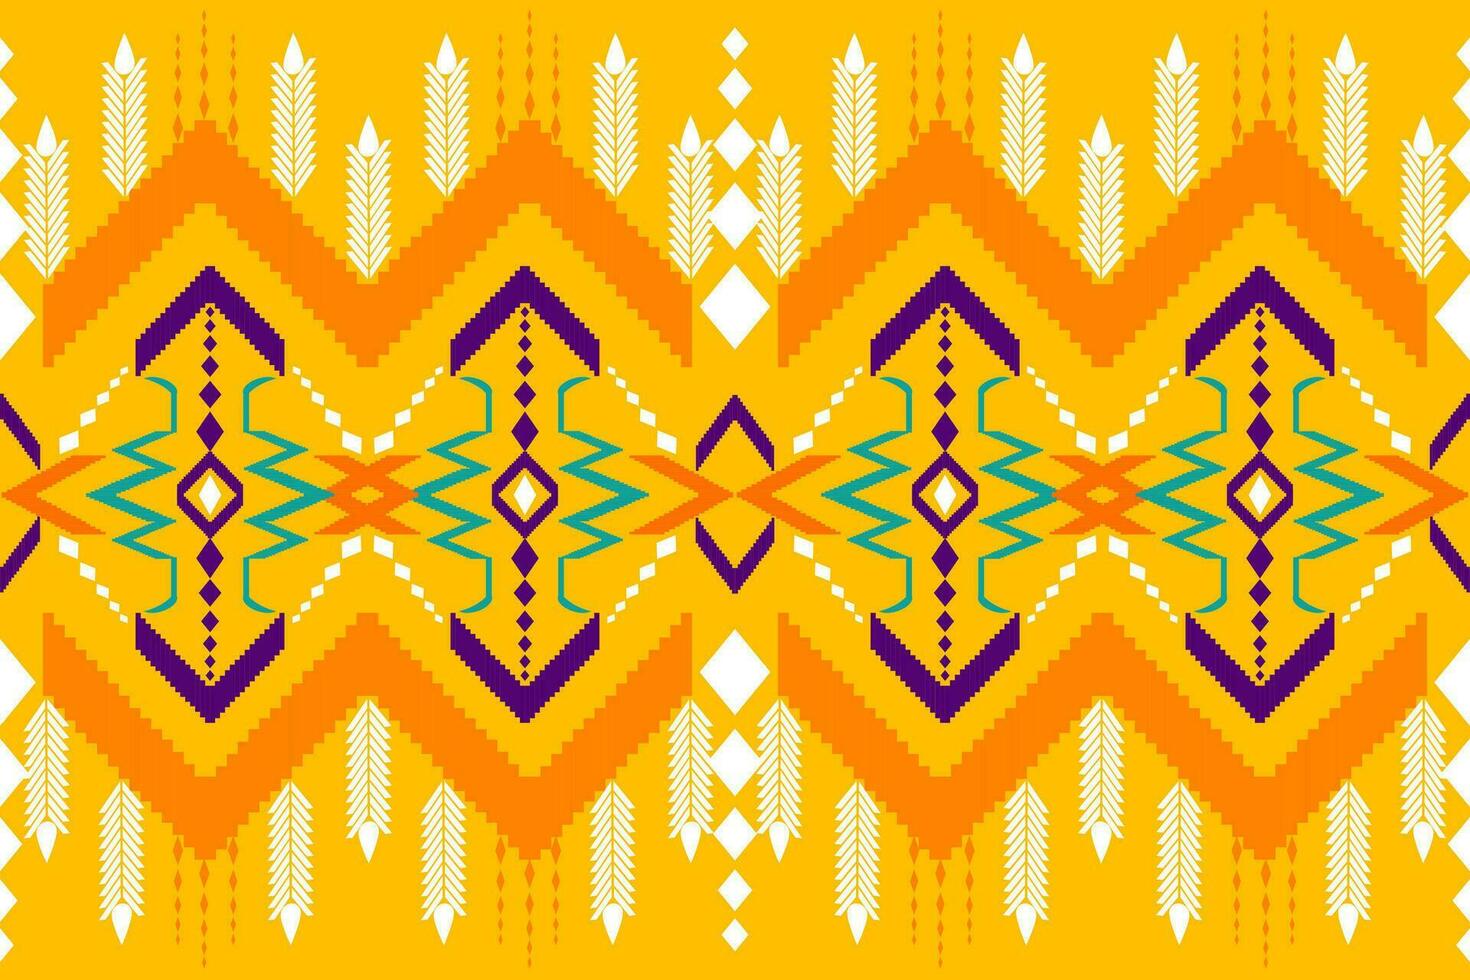 Ikat vector ethnic seamless pattern design. Ikat Aztec fabric carpet ornaments textile decorations wallpaper. Tribal boho native ethnic turkey traditional embroidery vector background